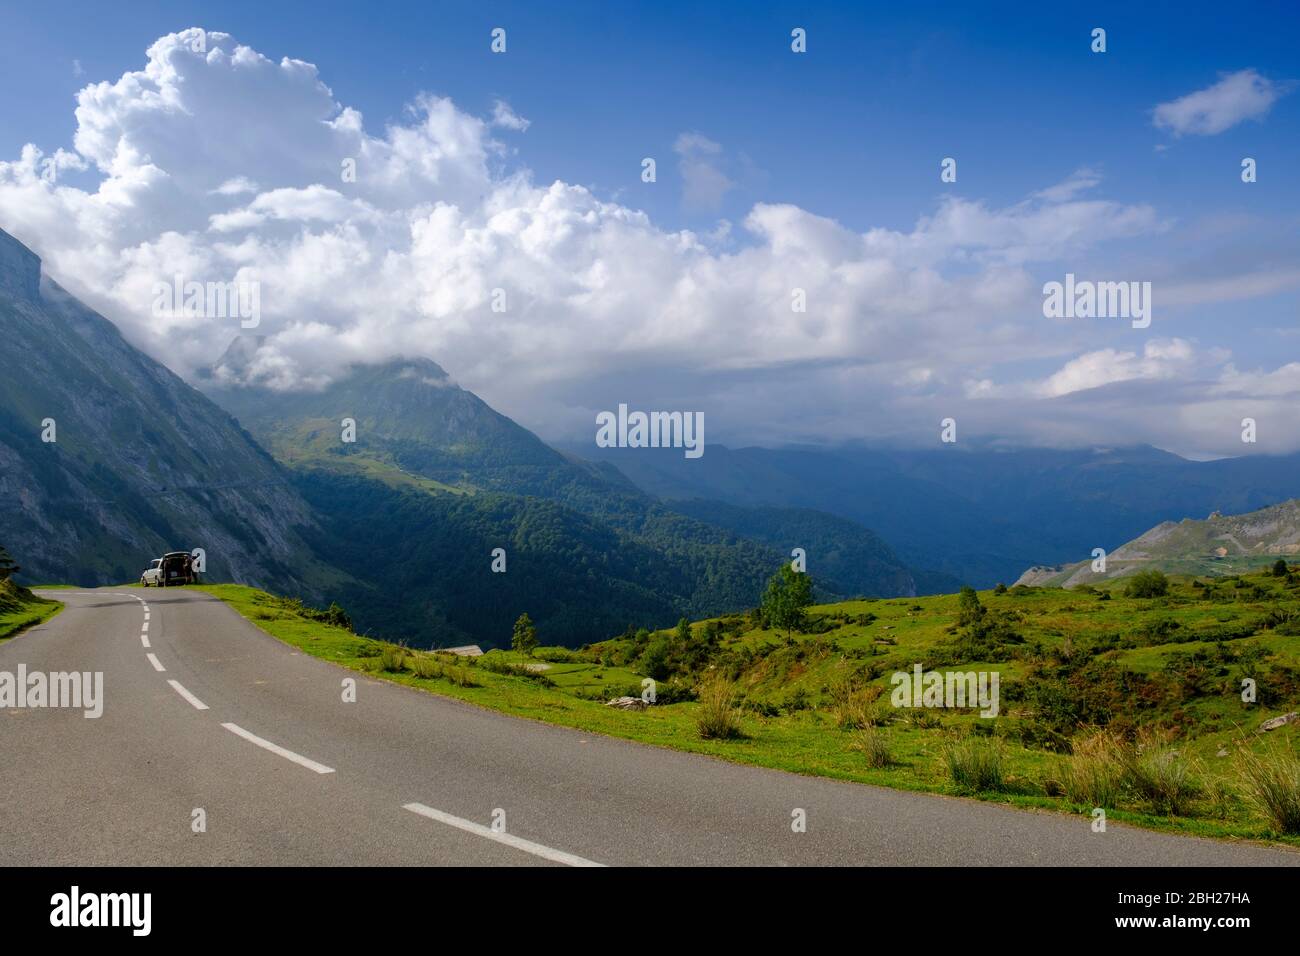 France, Hautes-Pyrenees, Empty highway in Col dAubisque mountain pass Stock Photo